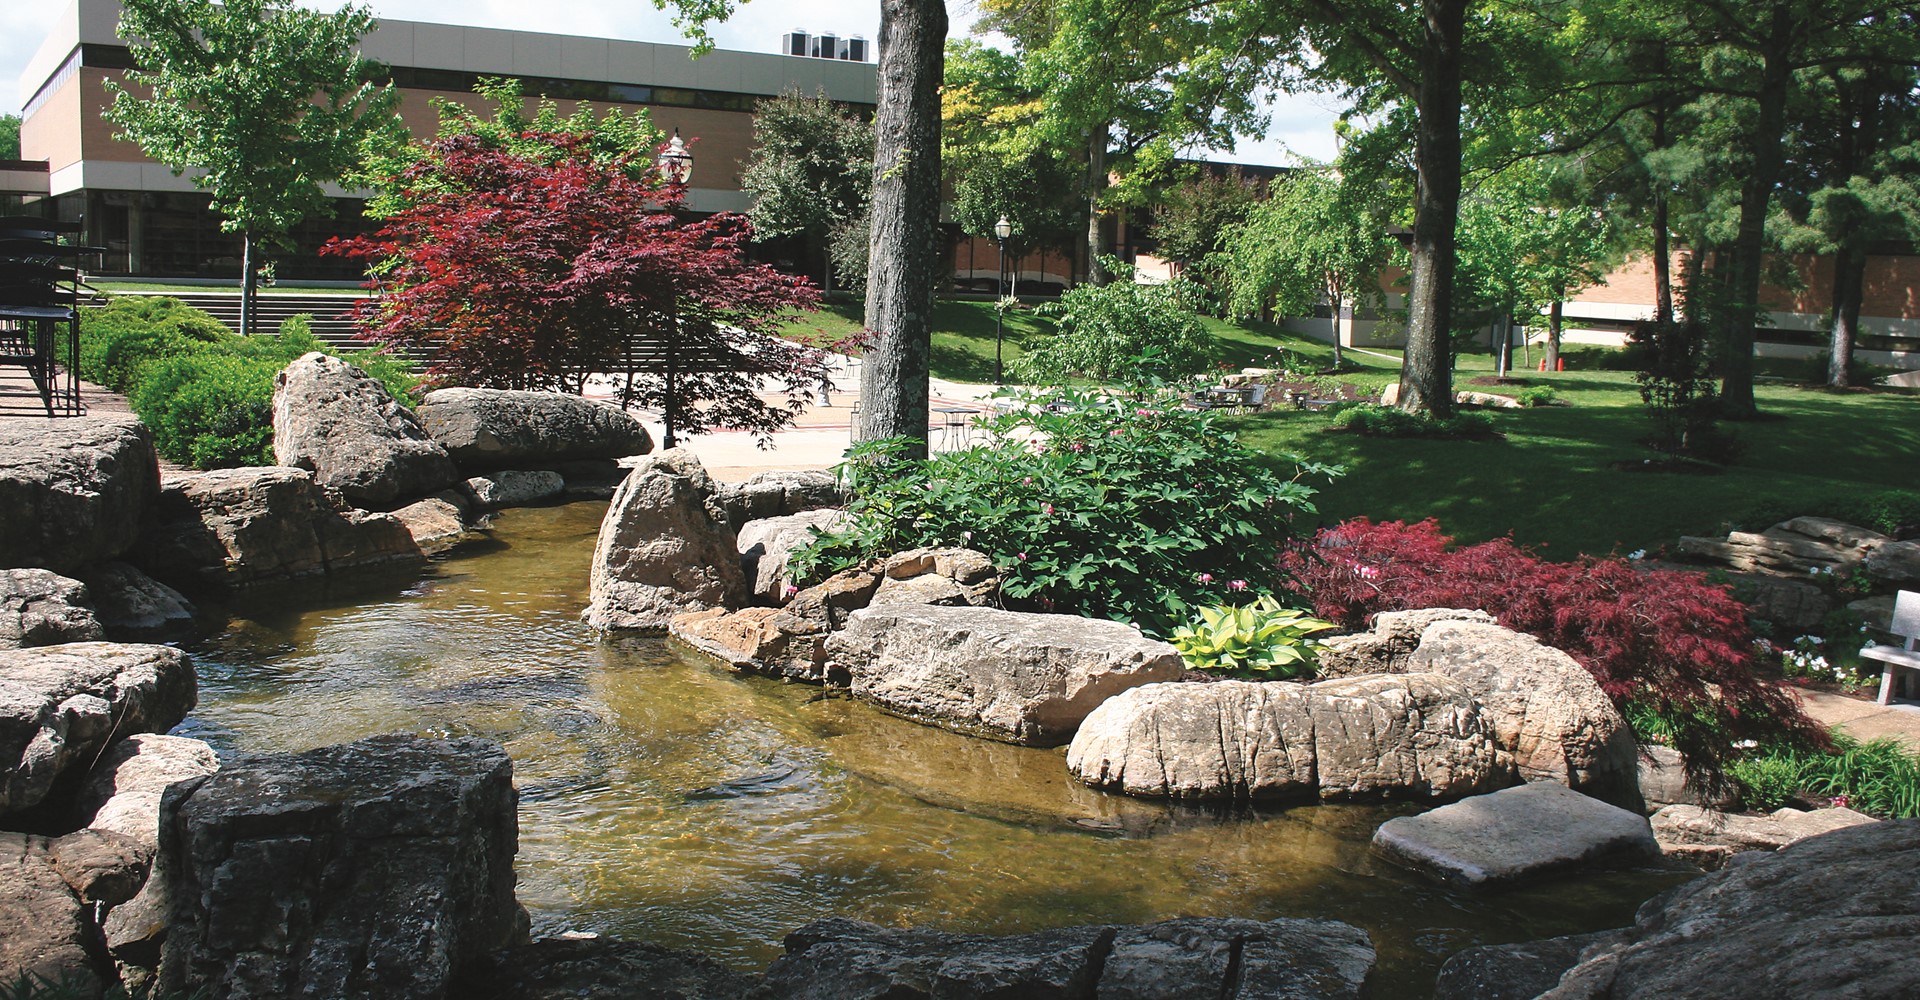 Image shows Mineral Area College's landscaping in the center of the main Park Hills campus, featuring a waterfall